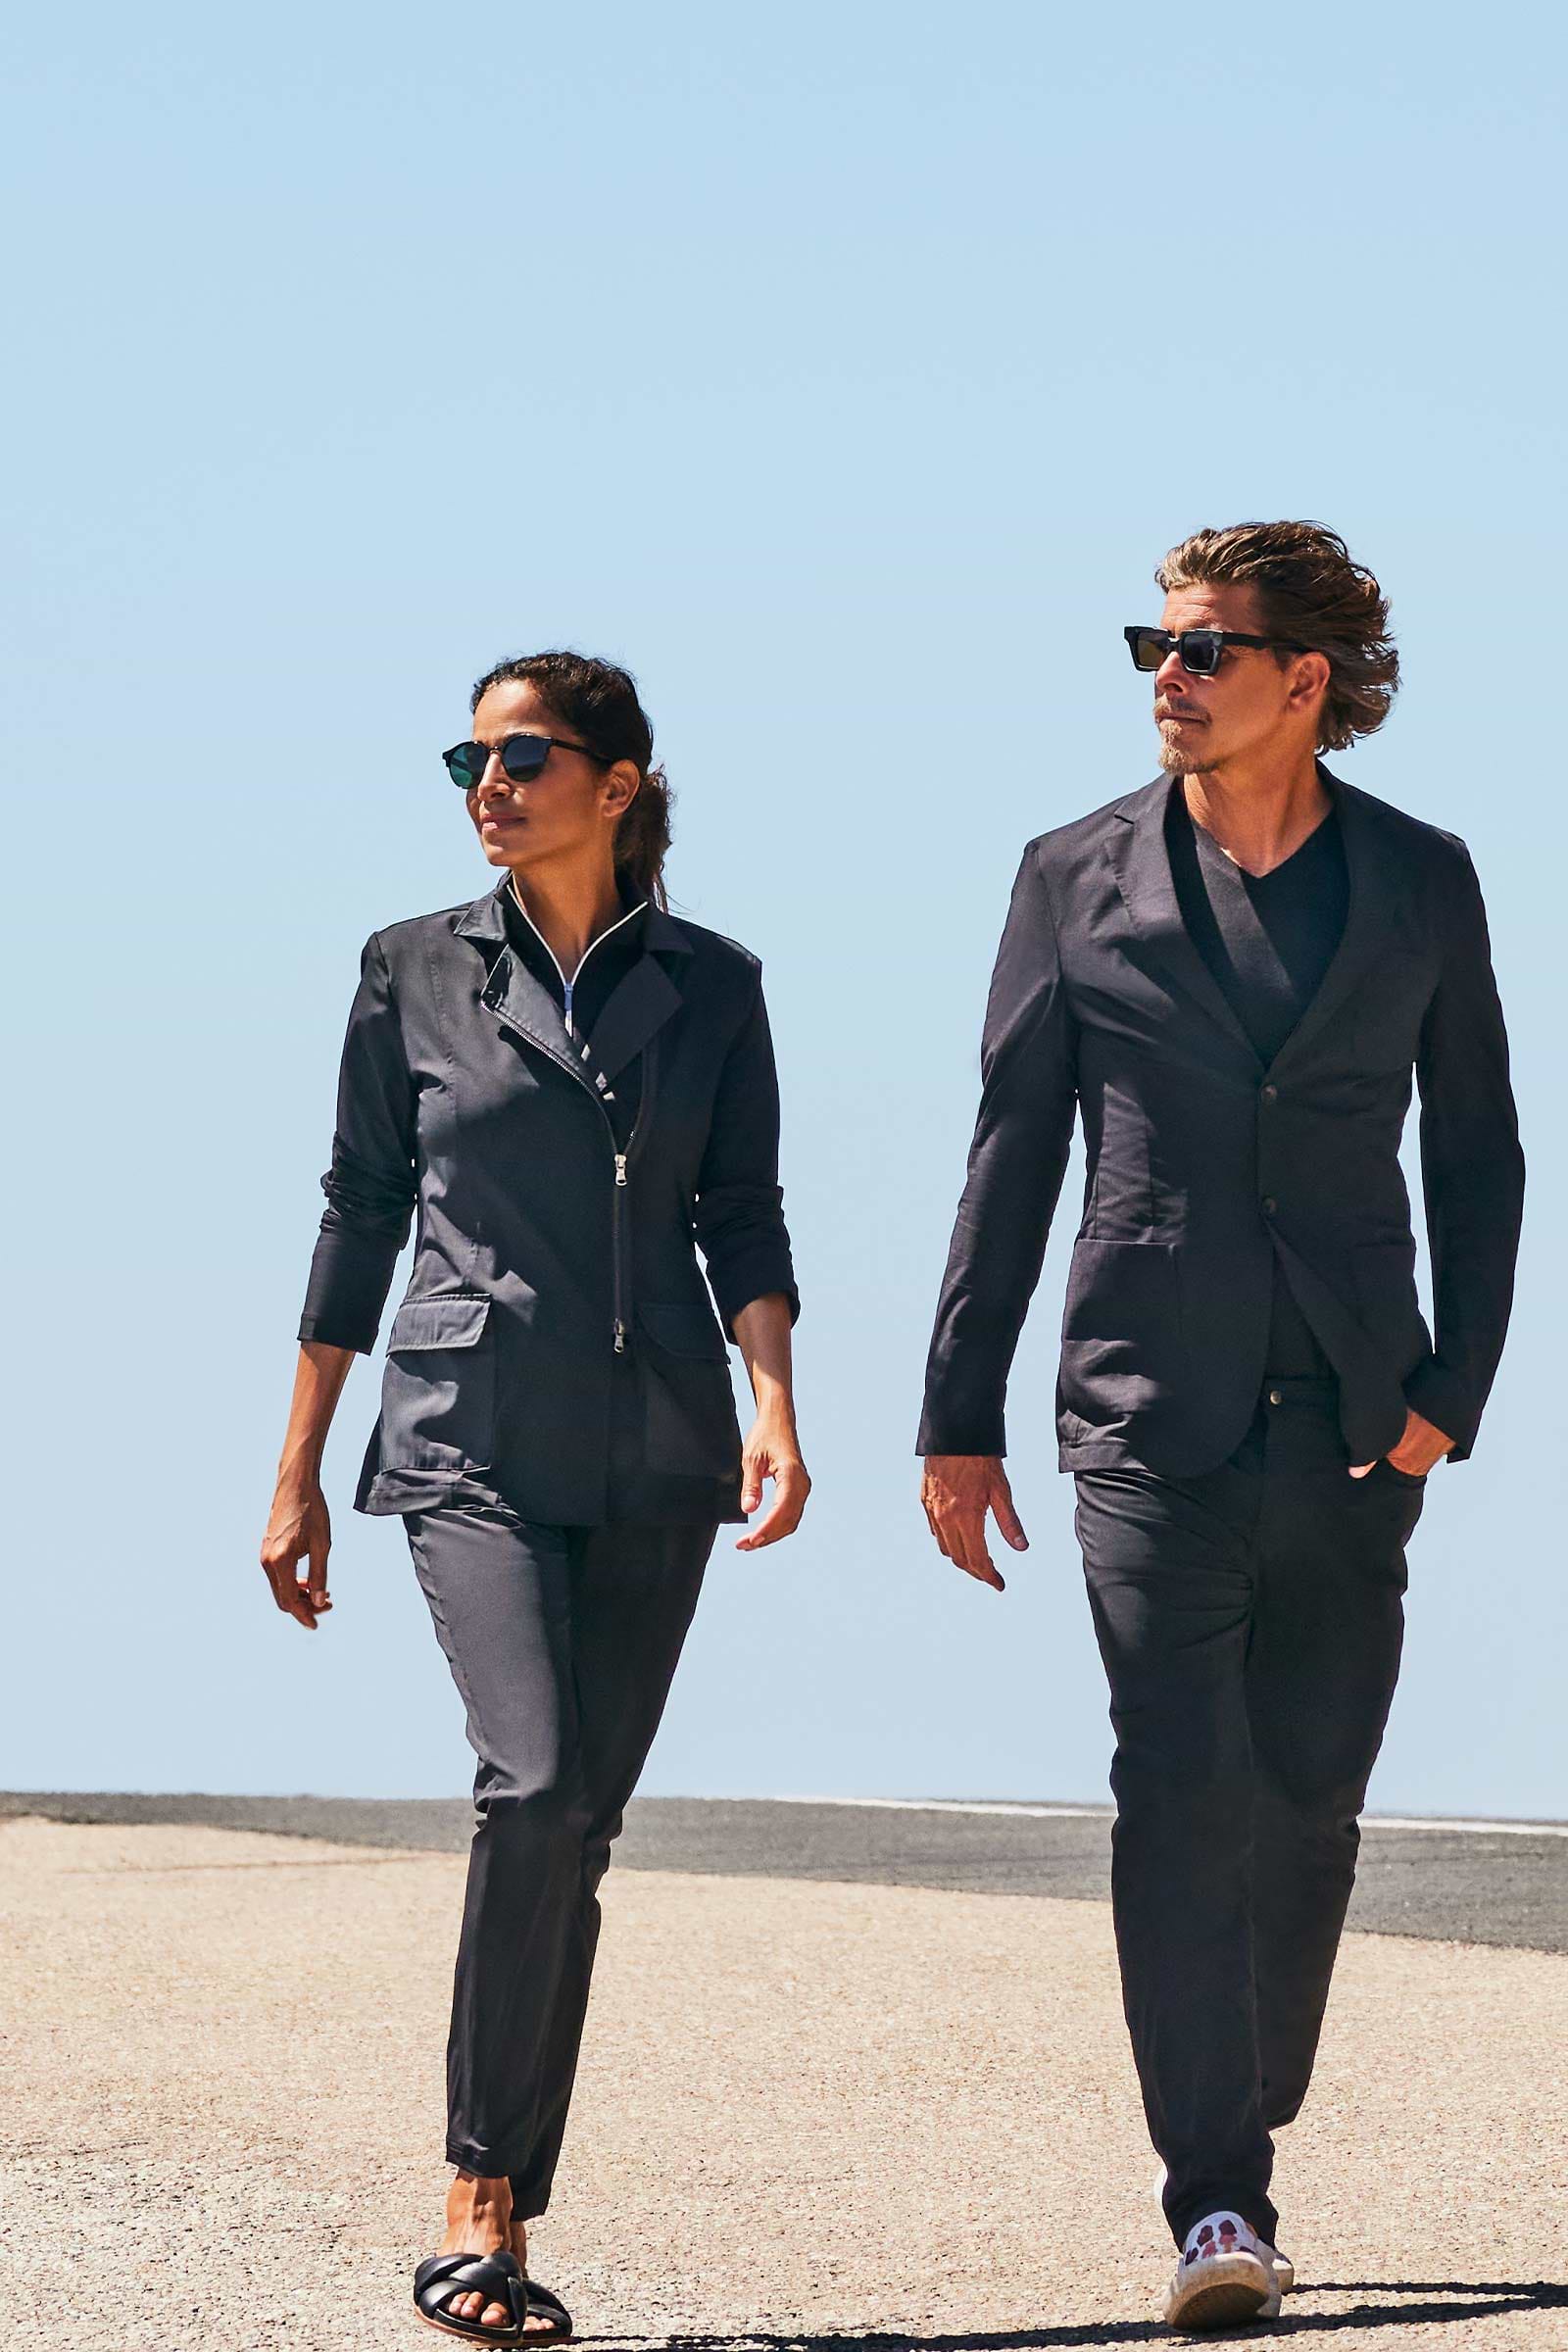 The Best Travel Jacket. Lifestyle Image of an Allegra Jacket in Black.